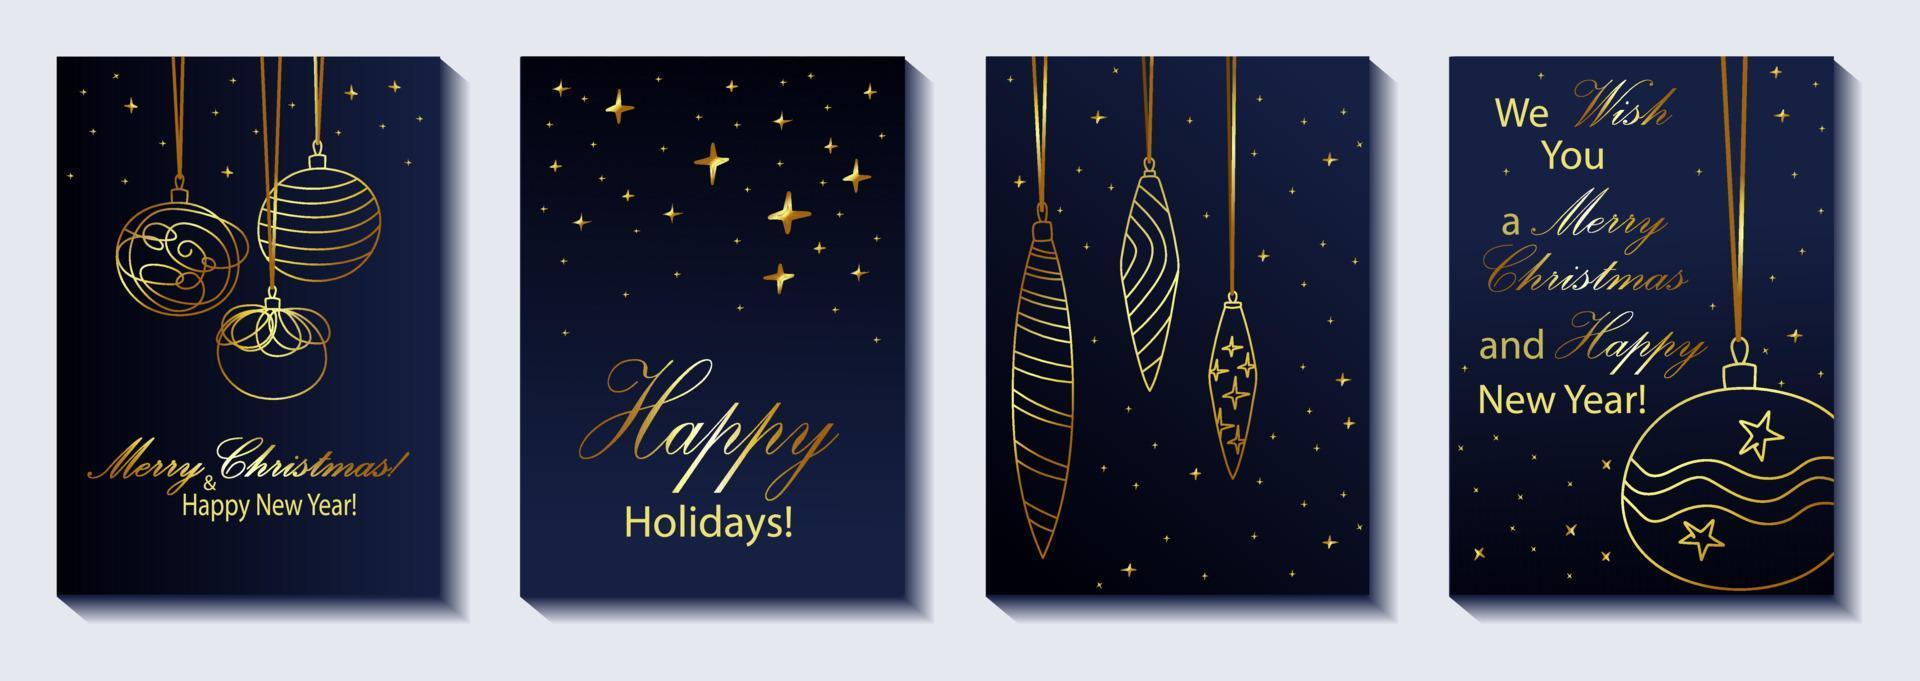 Christmas greeting cards with golden baubles vector illustration